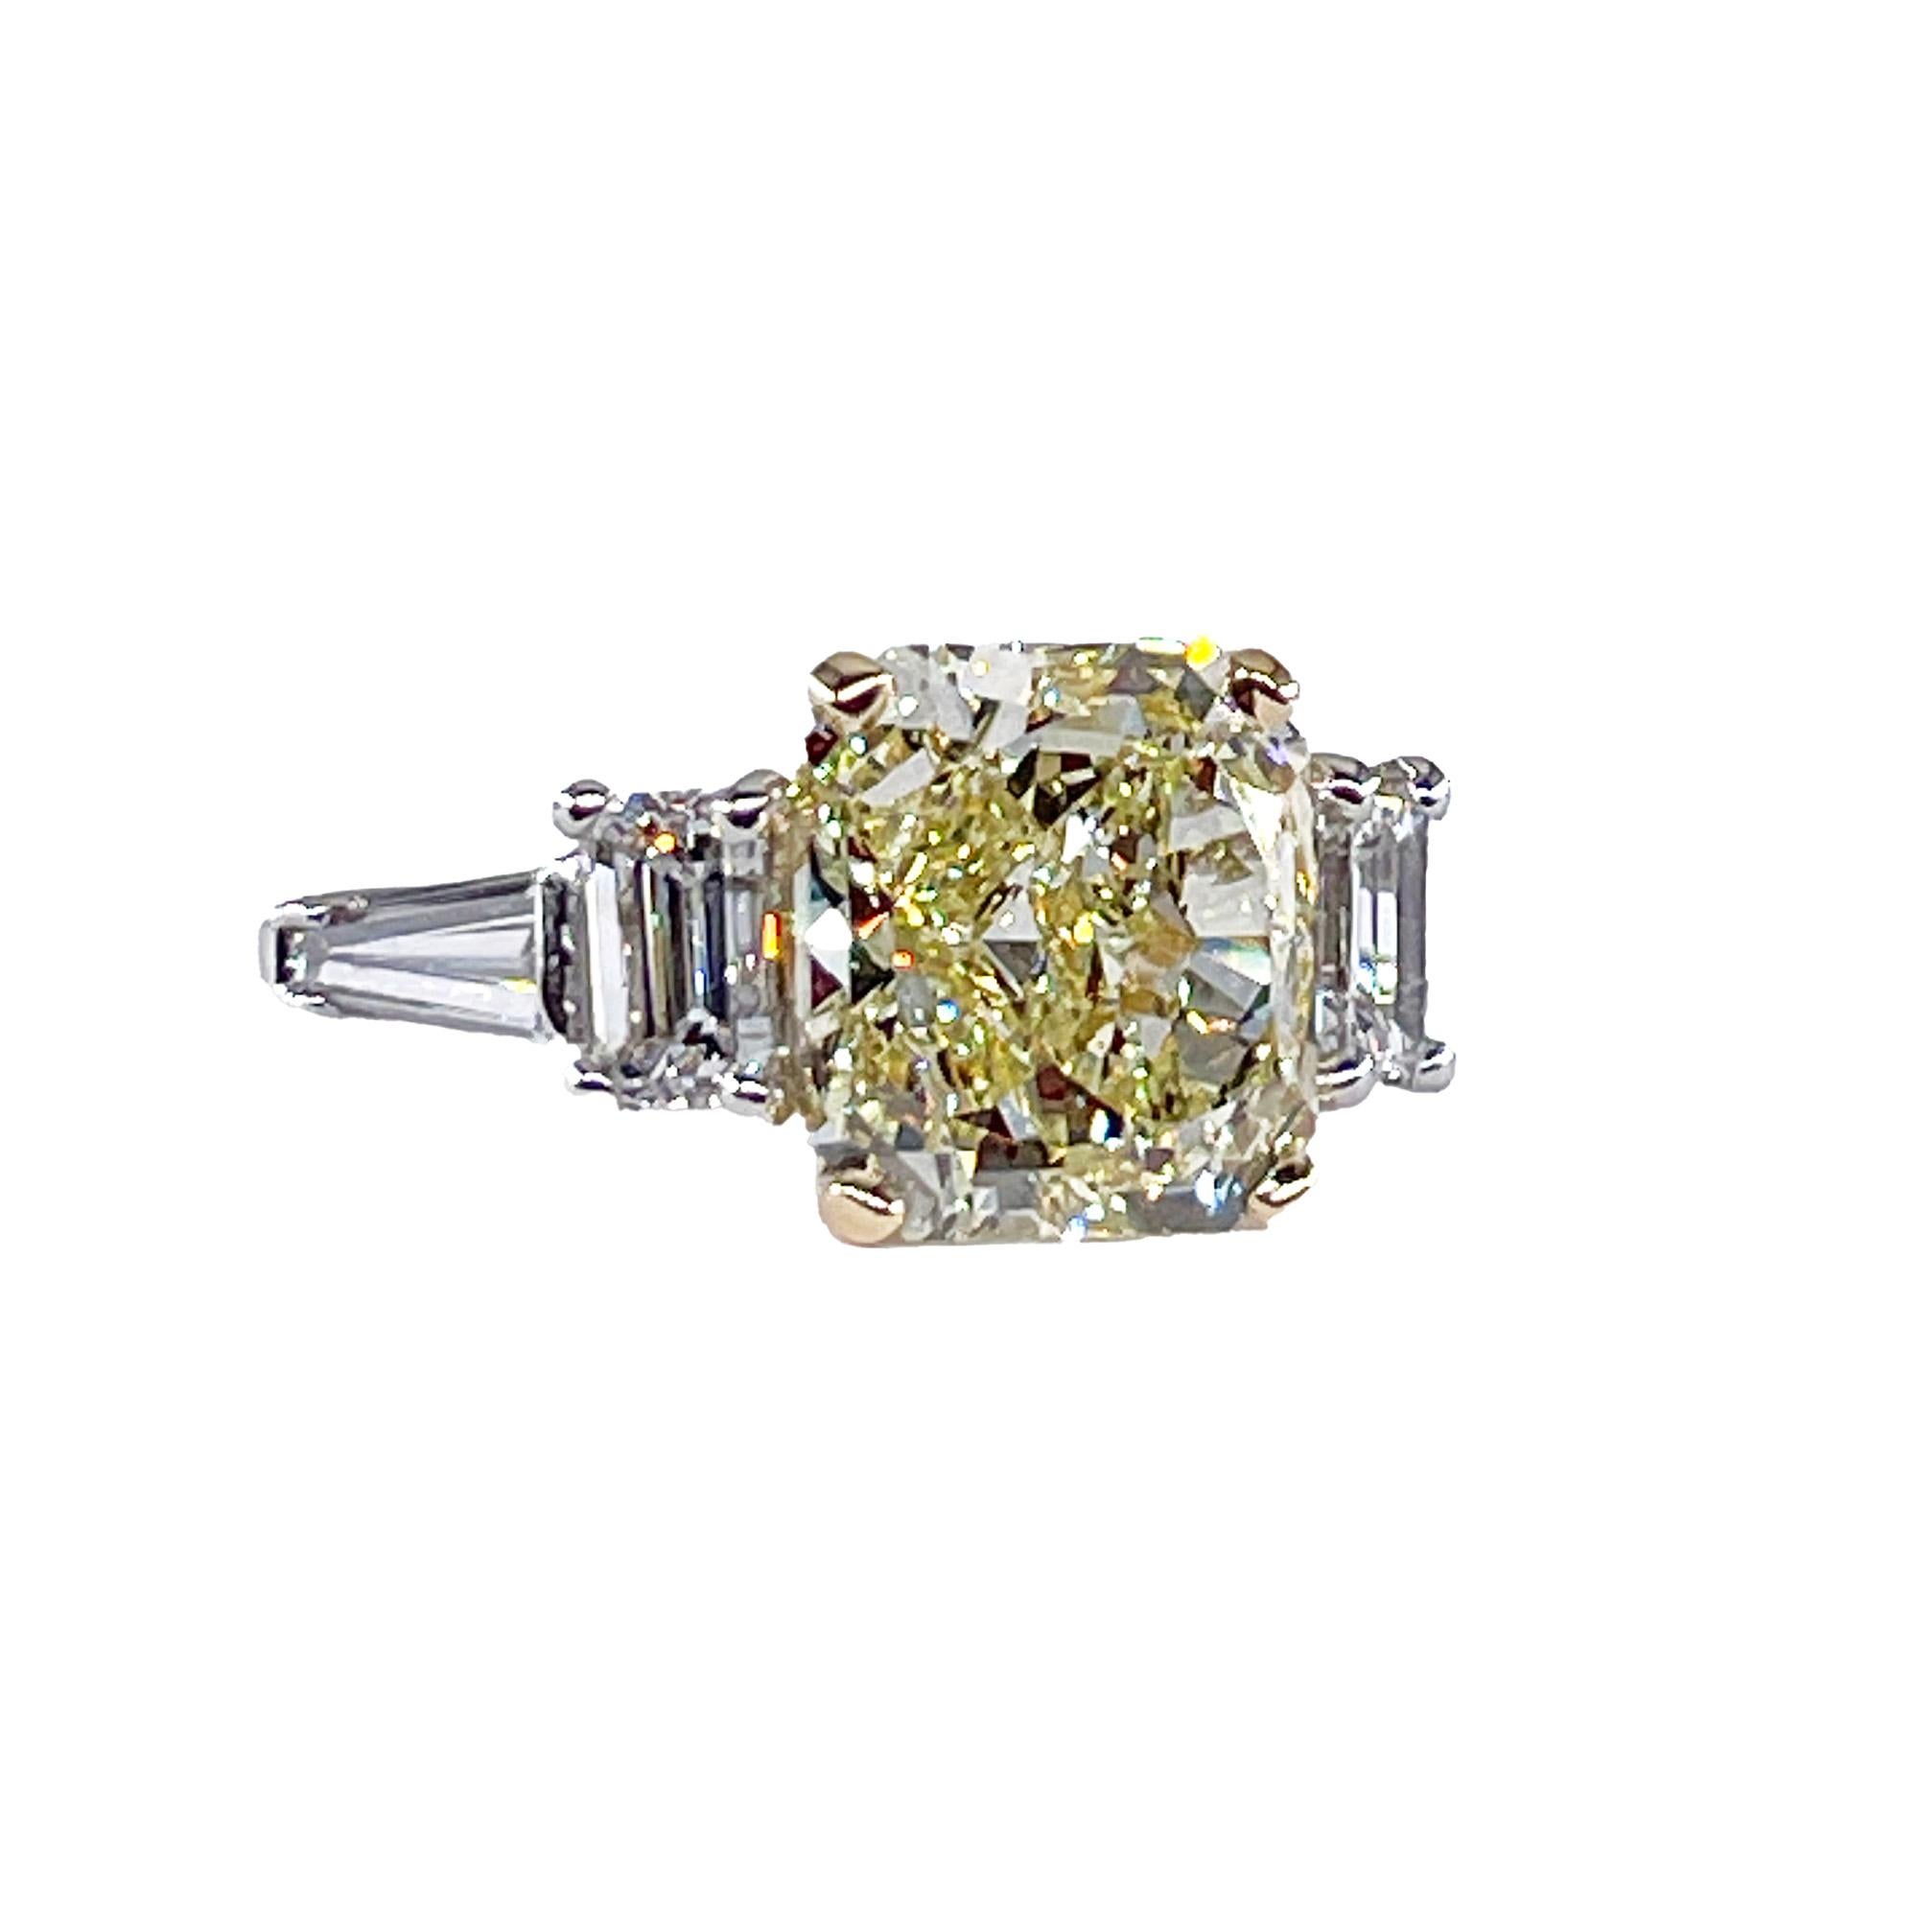 Impressive Vintage “Canary” GIA 7.11ctw Natural Fancy YELLOW Radiant Cut Diamond 5 Stone Platinum Engagement Wedding Anniversary Ring

This is ring is just Beautiful! The Ultimate Luxury. A beams of sunshine radiate day and night from this fabulous